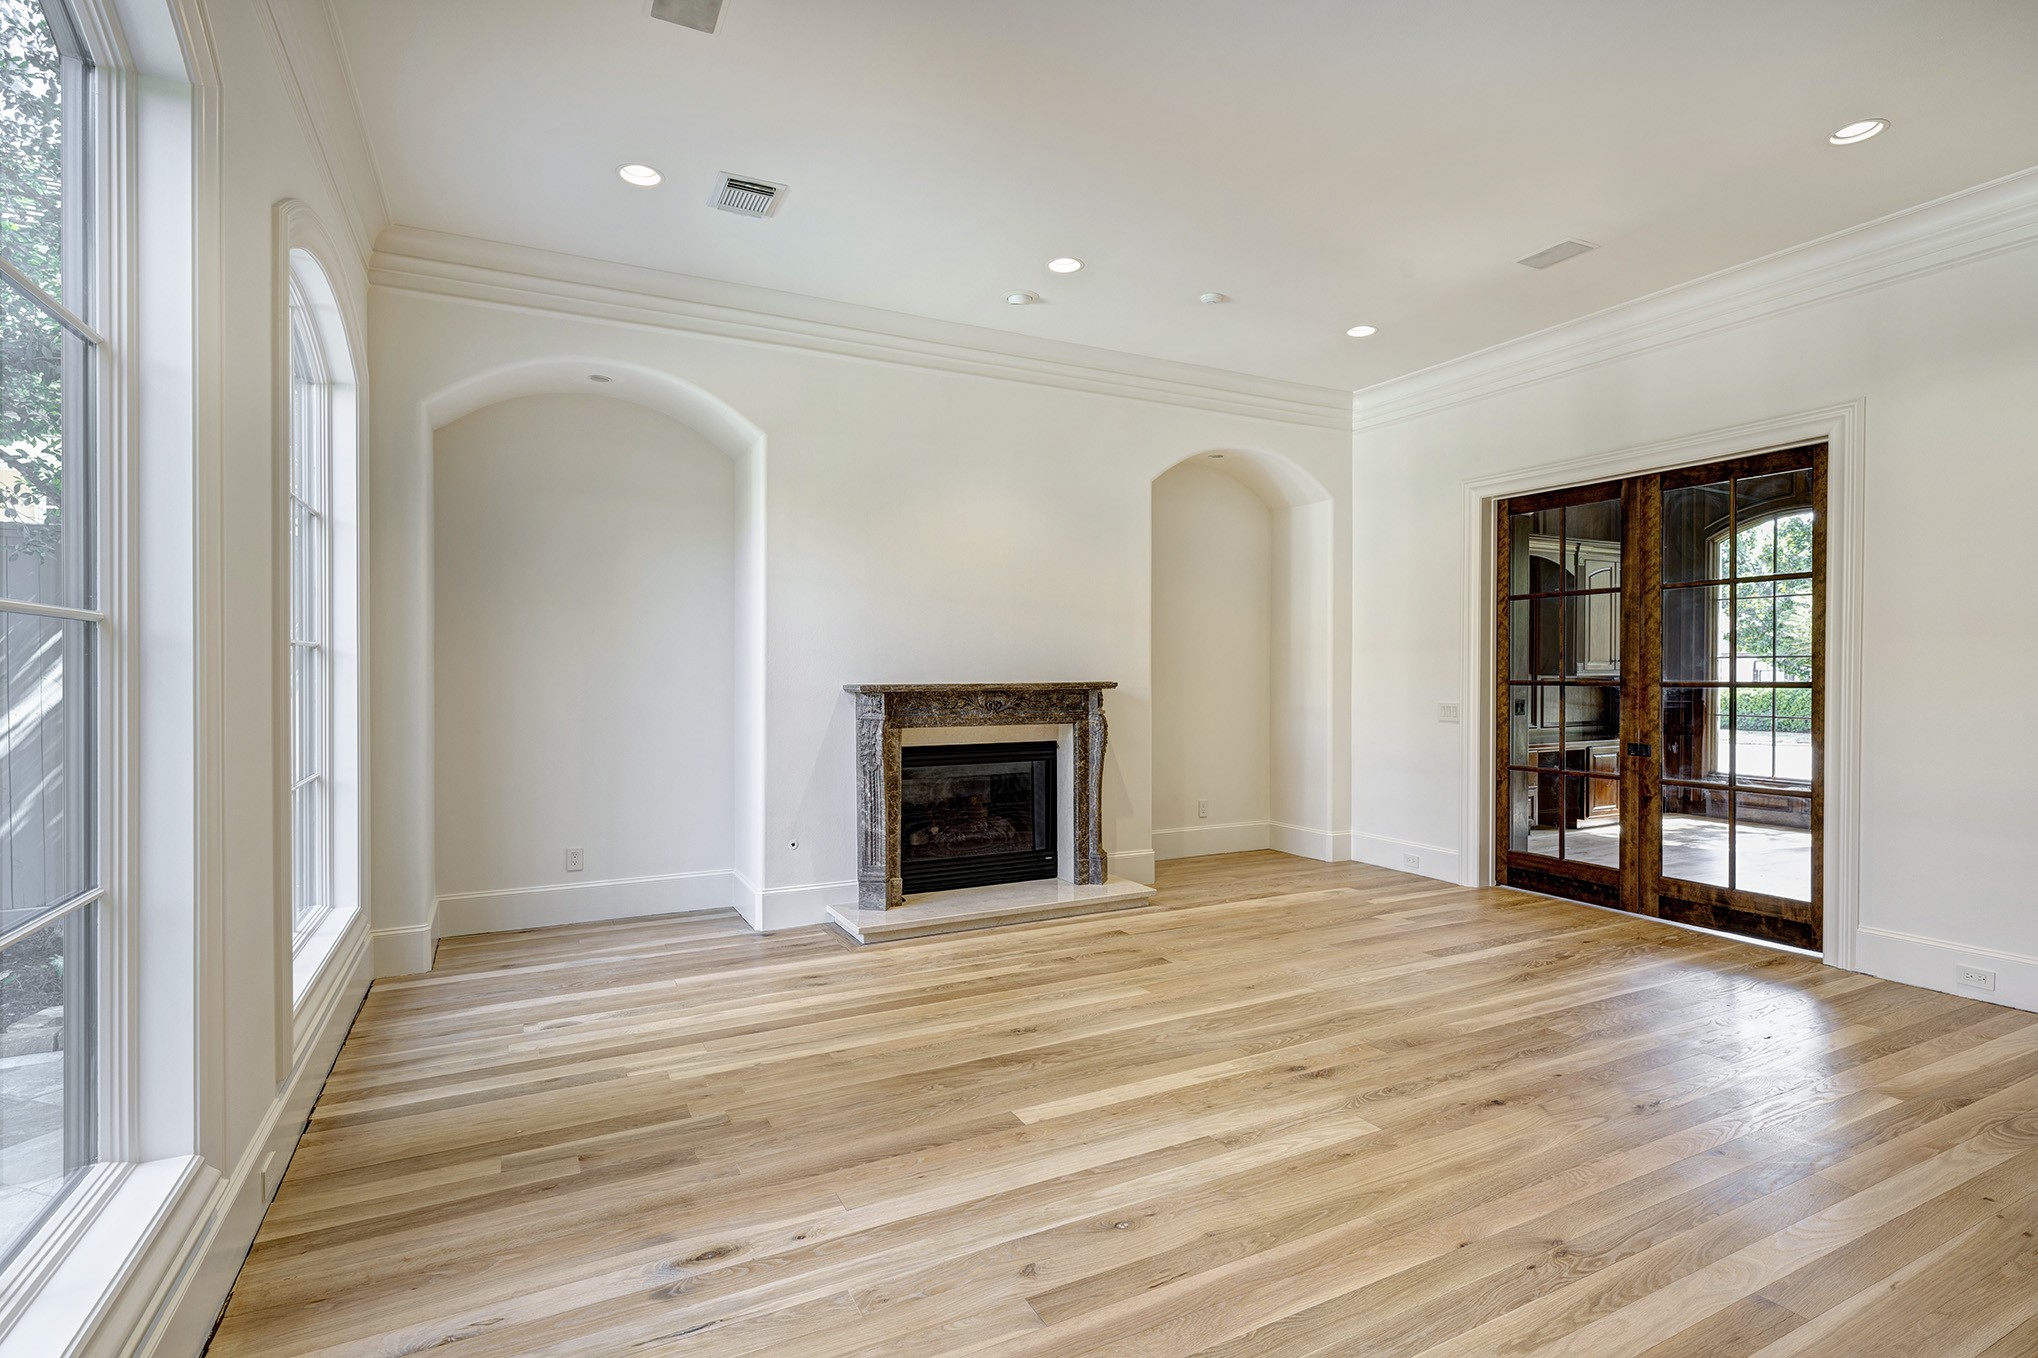 Formal living room is large and bright with gas log fireplace.